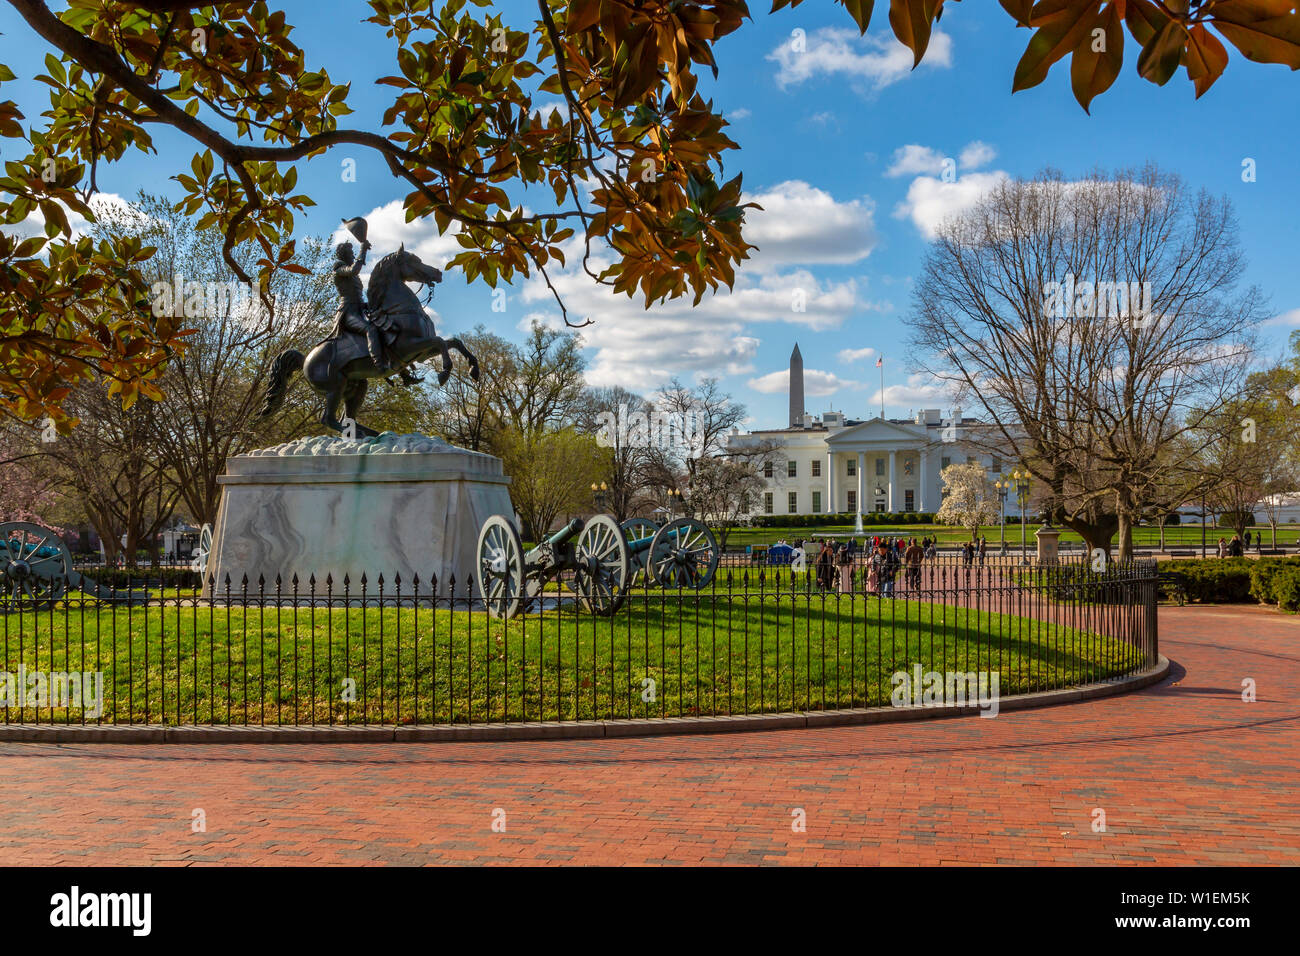 View of The White House and spring blossom in Lafayette Square, Washington D.C., United States of America, North America Stock Photo